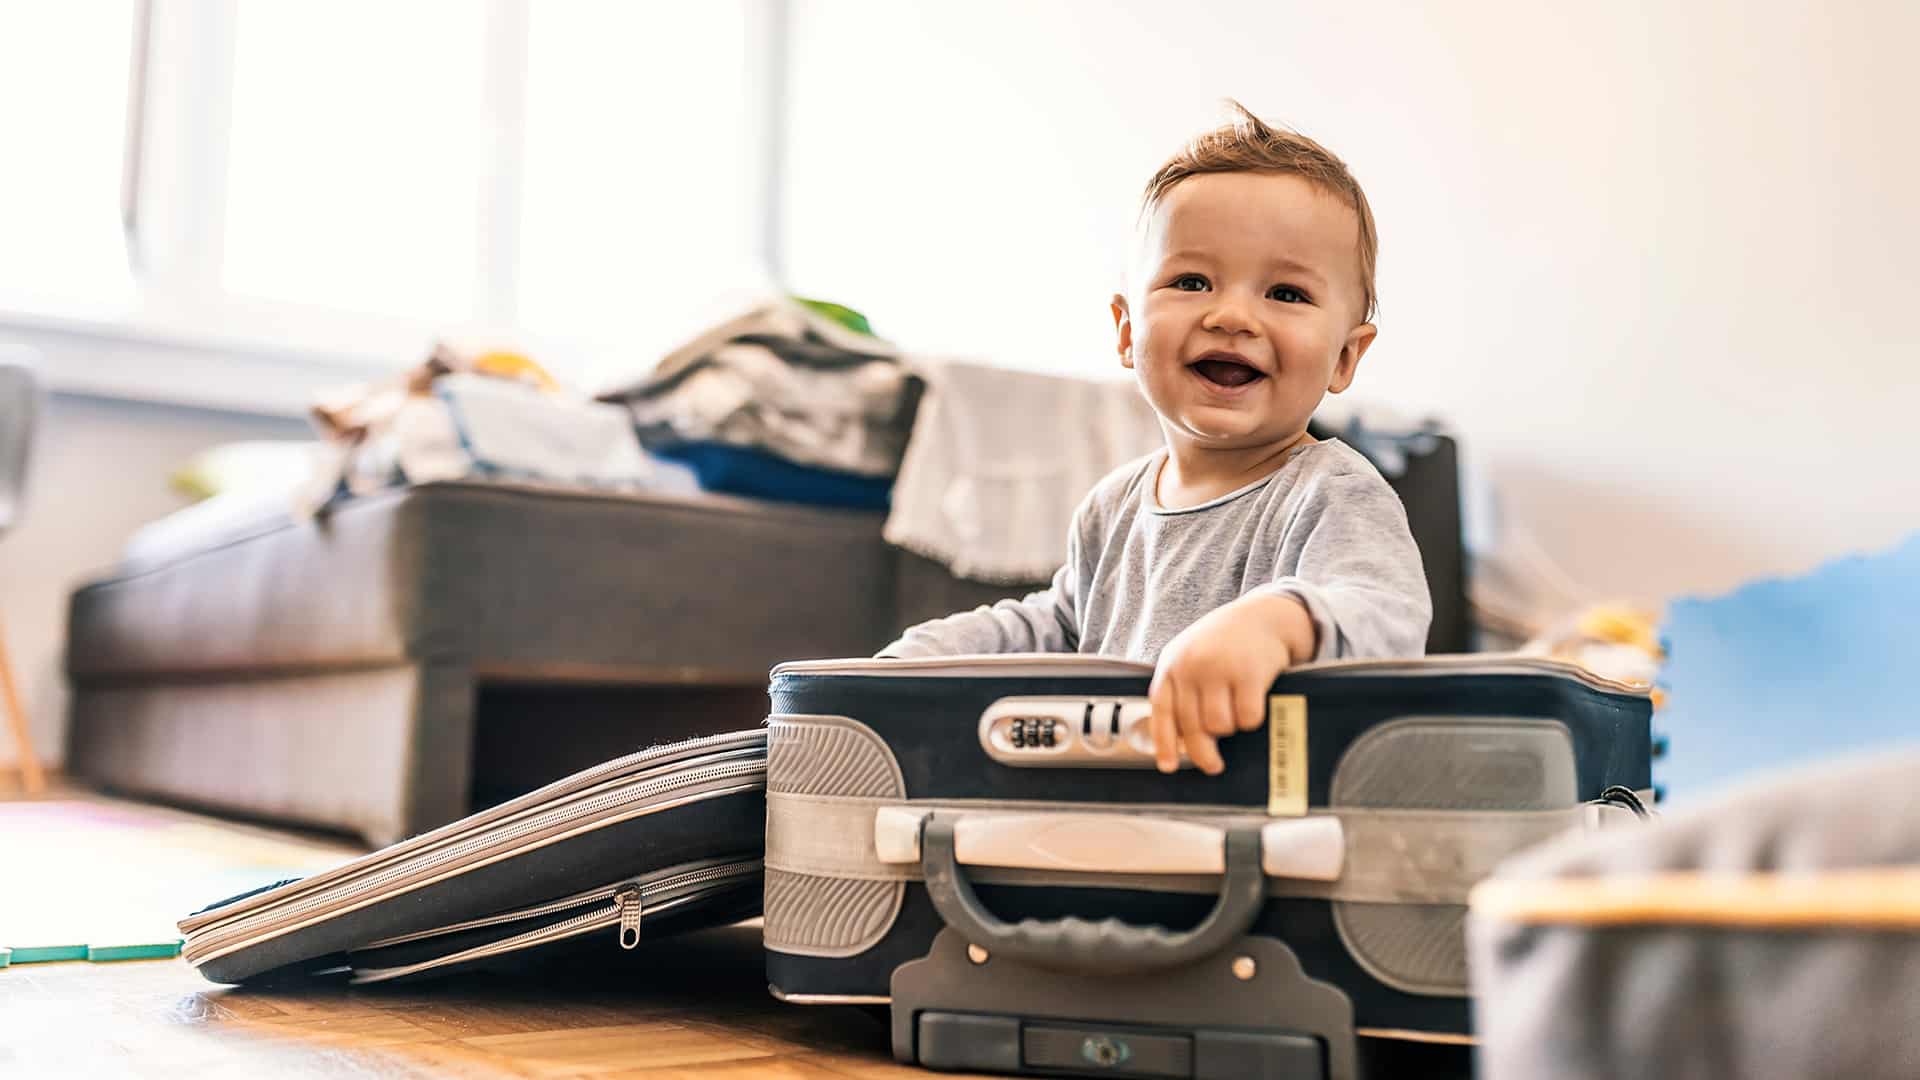 Traveling with Kids? Pack These 20 Things (and Leave These 3 Things Home)